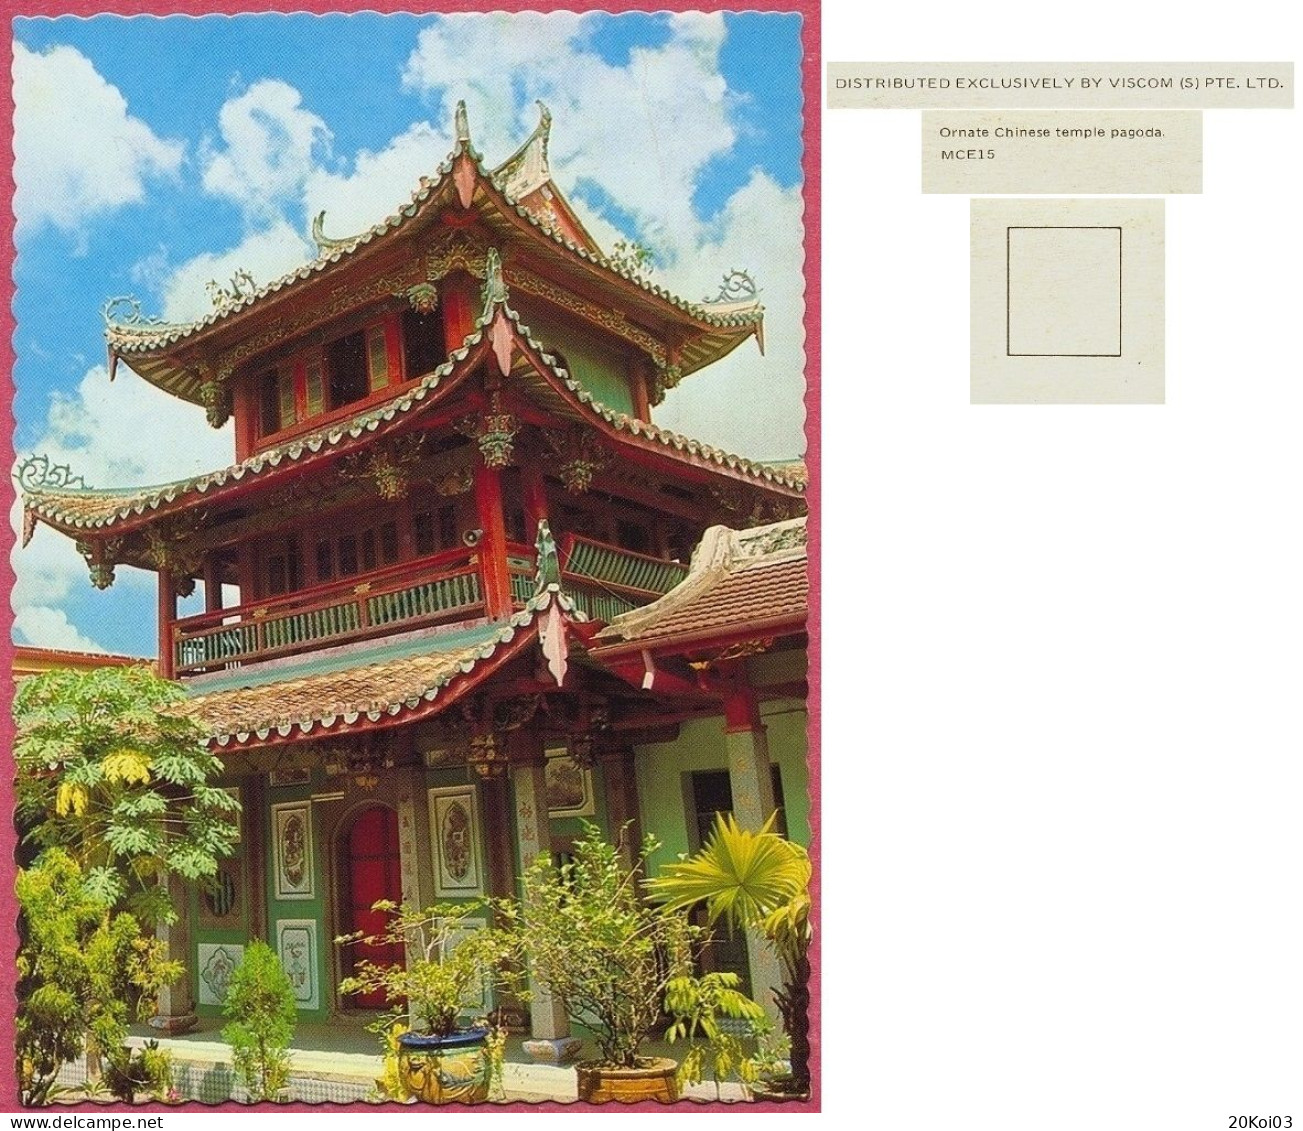 Singapore Ornate Chinese Temple Pagoda 1978's MCE15 DISTRIBUTED EXCLUSIVELY BY VISCOM (S) PTE. LTD. Vintage_cpc - Singapore